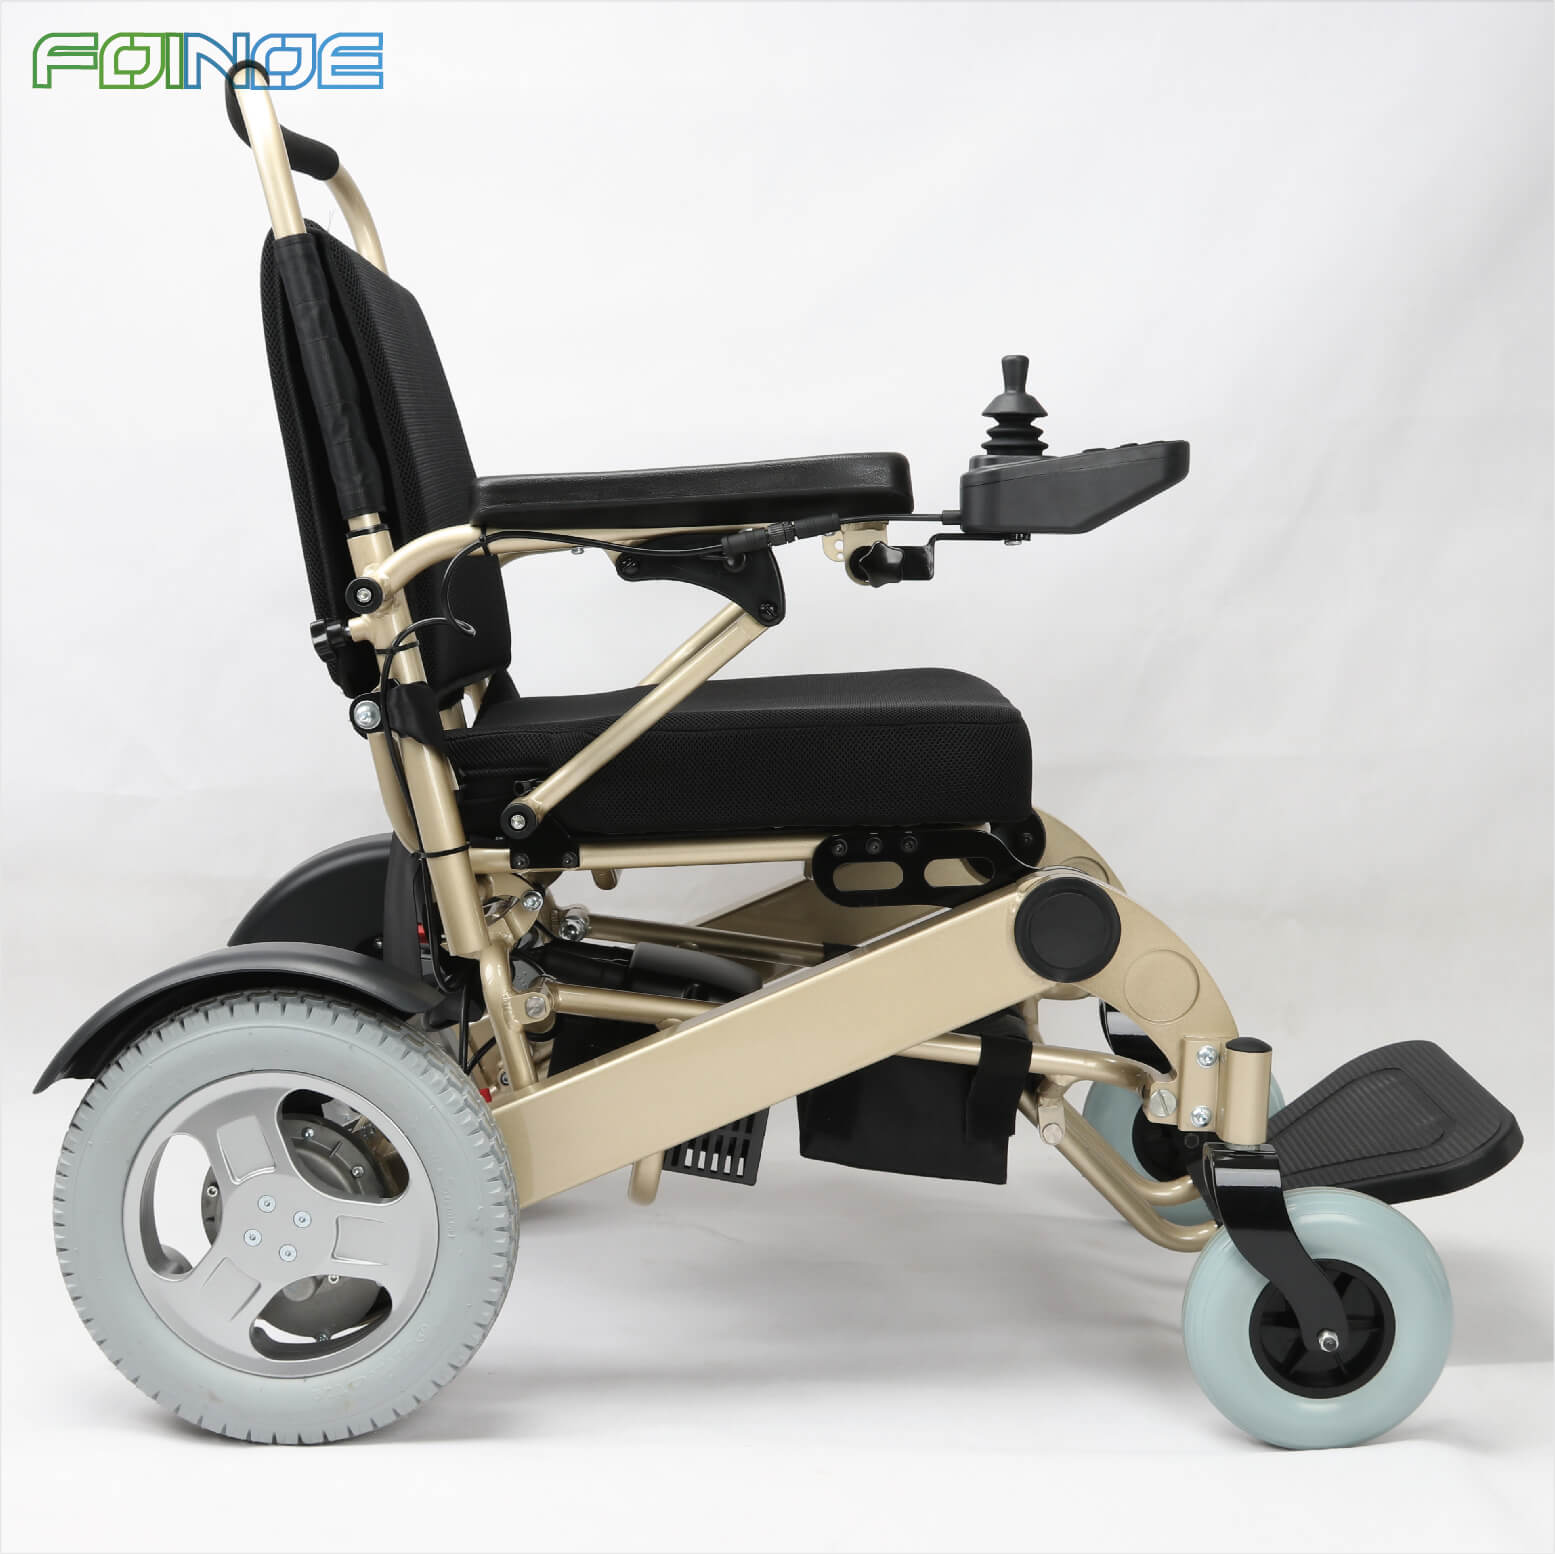 Folding Lightweight Motorized Wheelchair for Adults from China